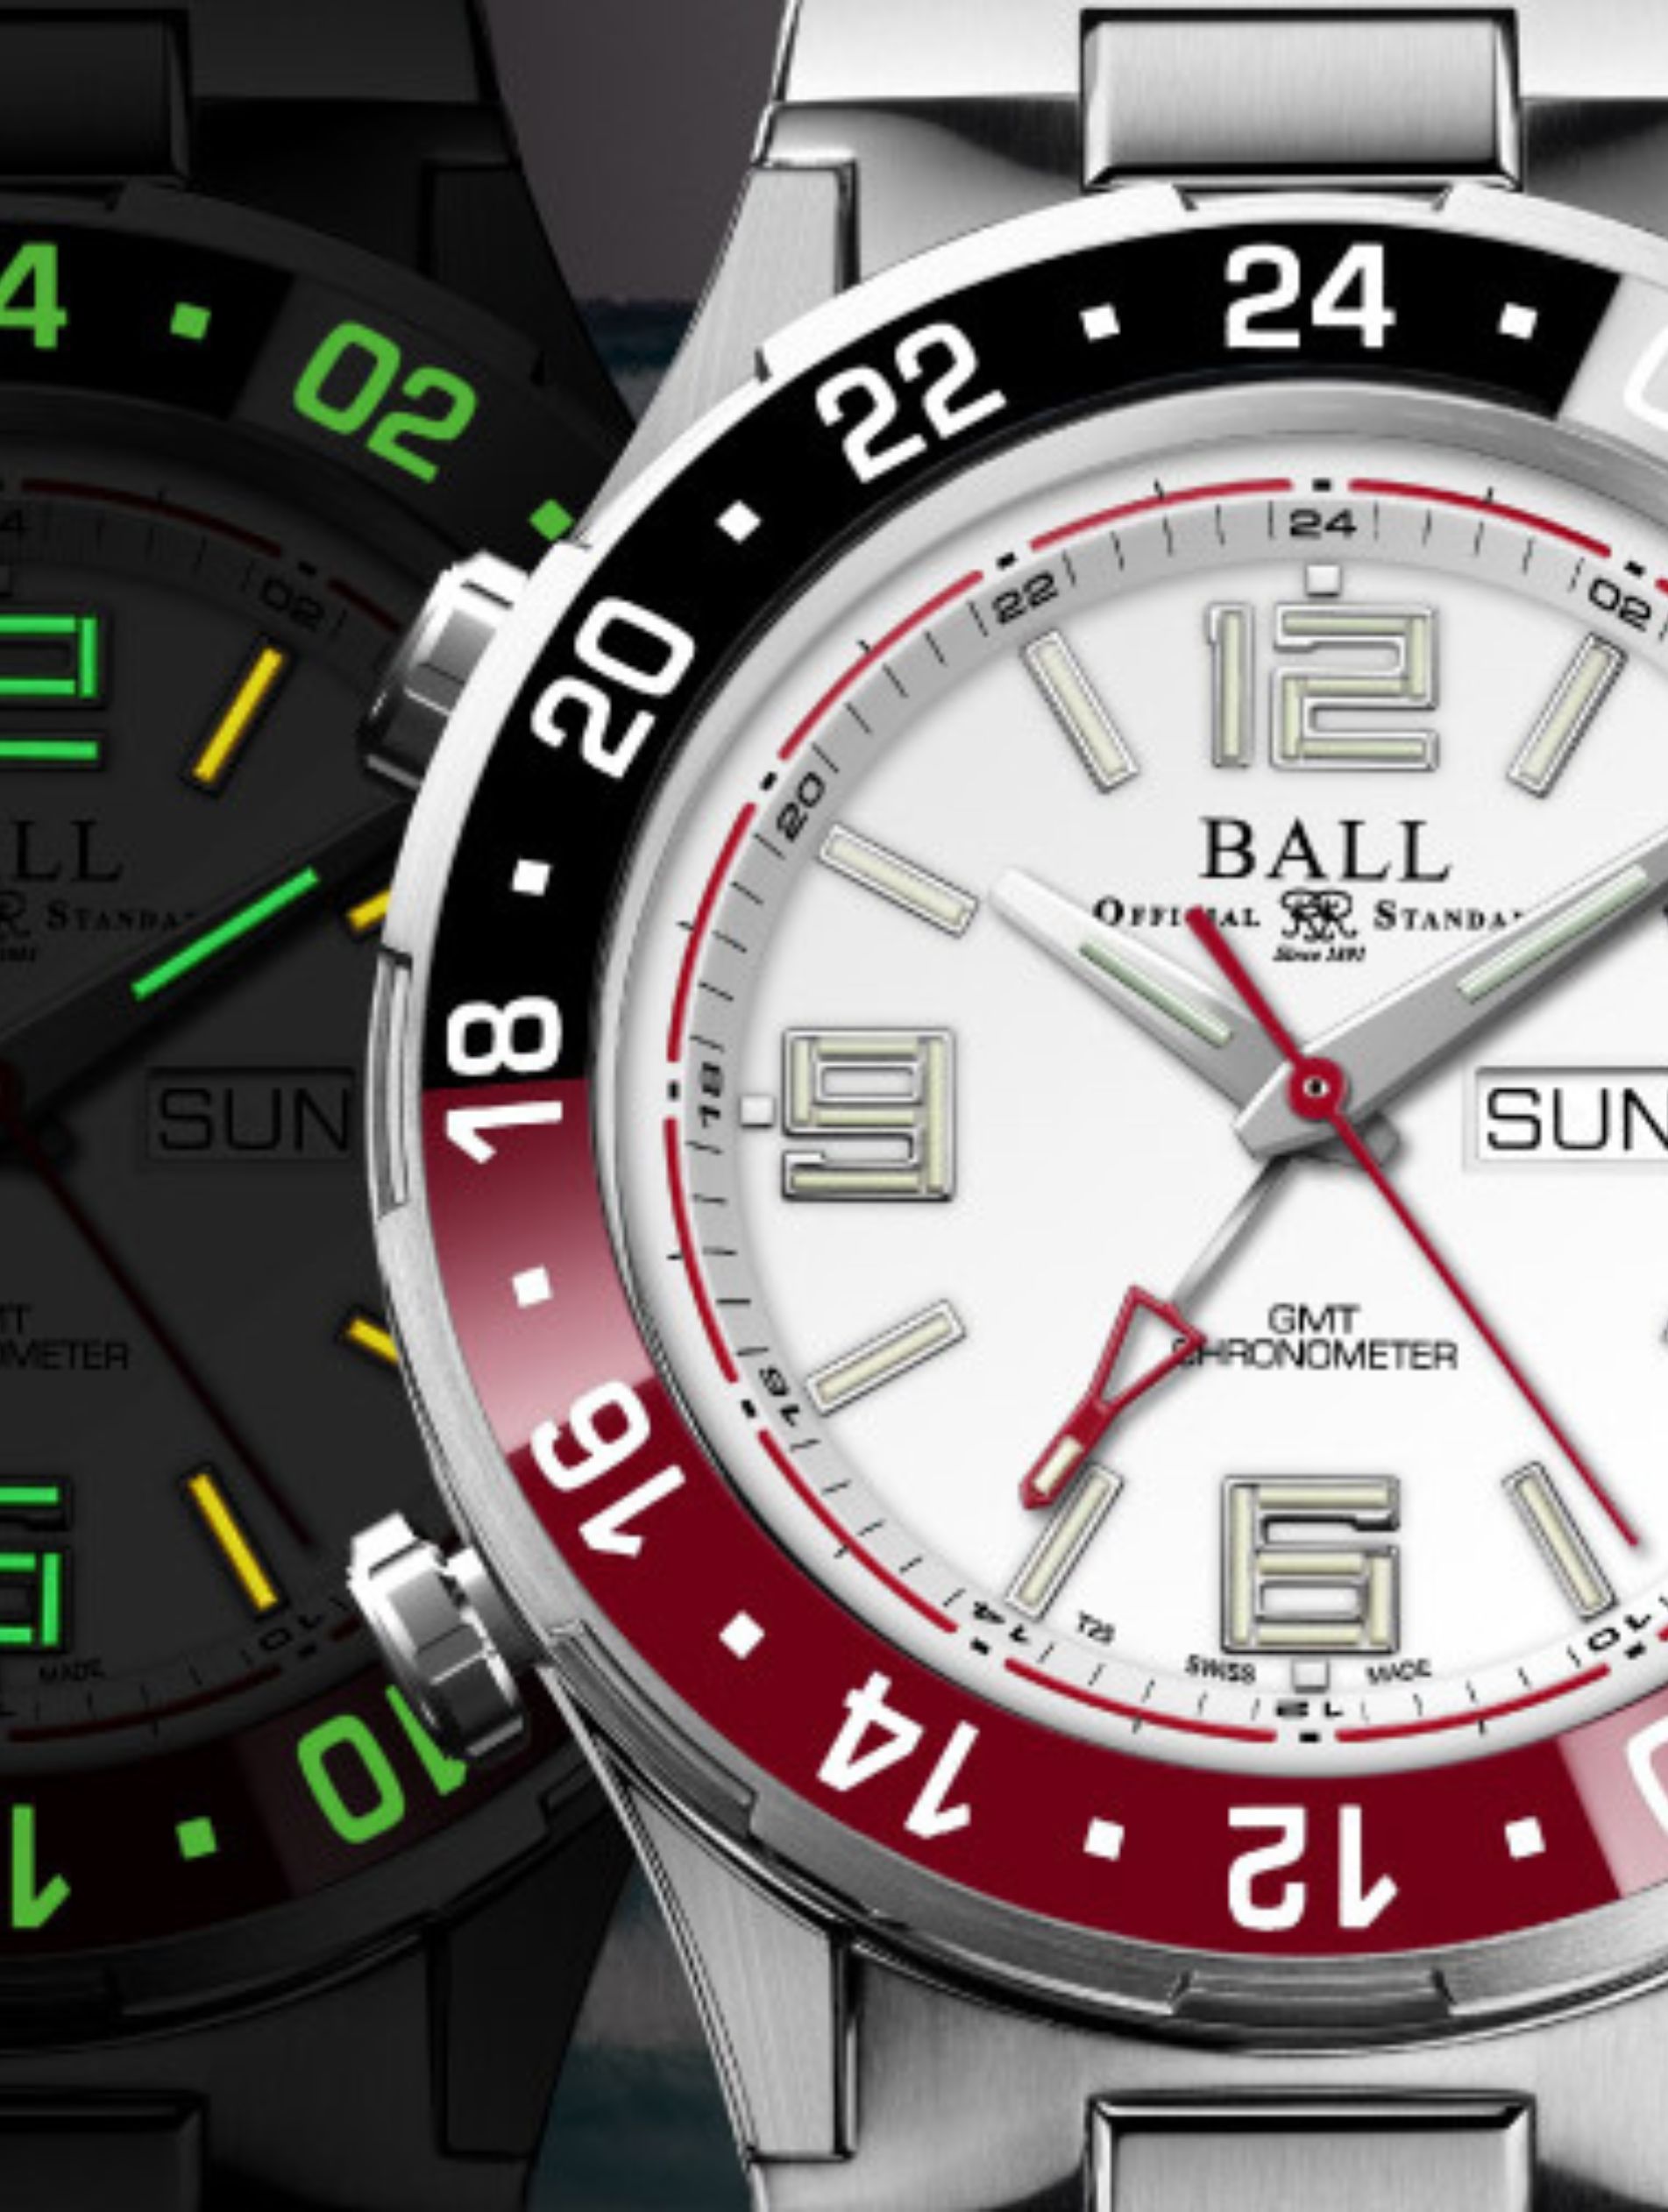 The Ball Roadmaster Marine GMT with red and black ceramic dial is available at Peter & Co. Jewelers Avon Lake, OH